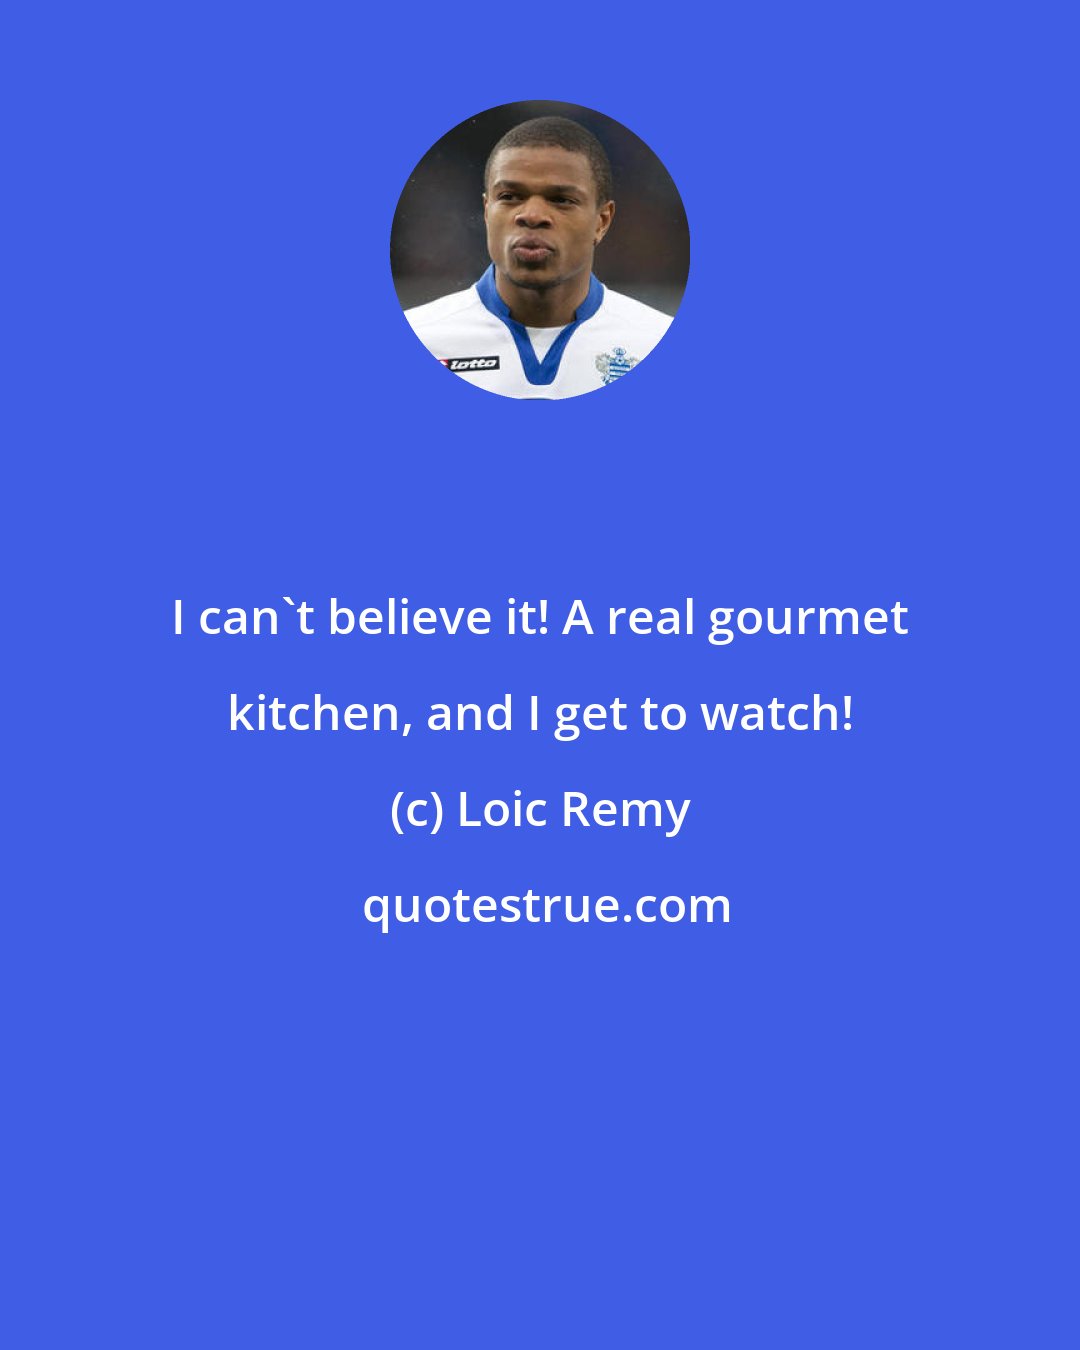 Loic Remy: I can't believe it! A real gourmet kitchen, and I get to watch!